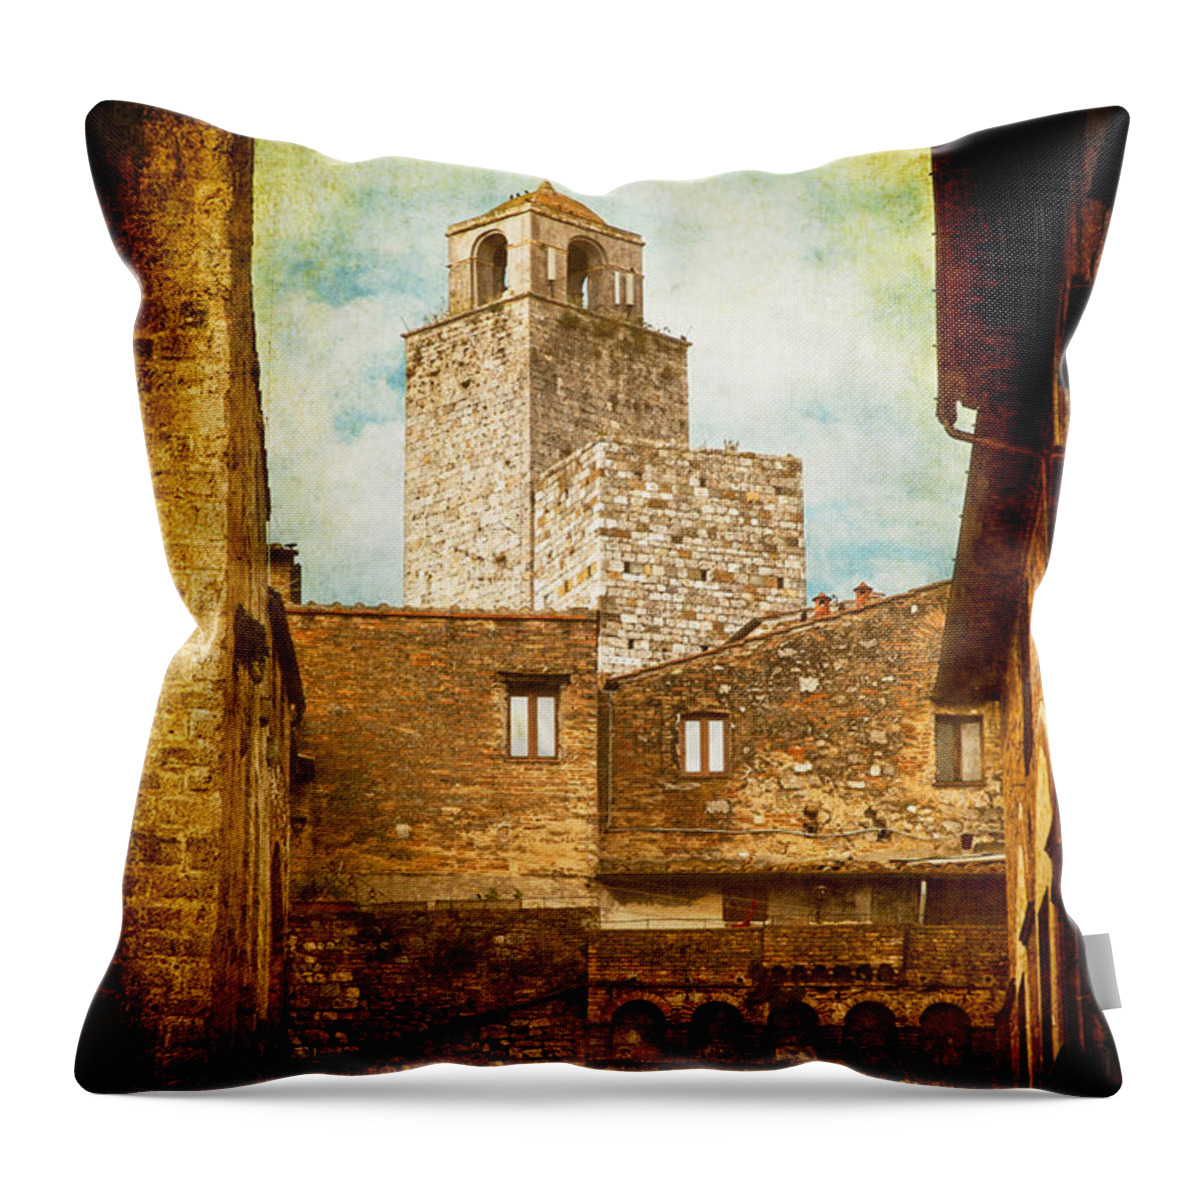 Architecture Throw Pillow featuring the photograph San Gimignano Italy by Silvia Ganora